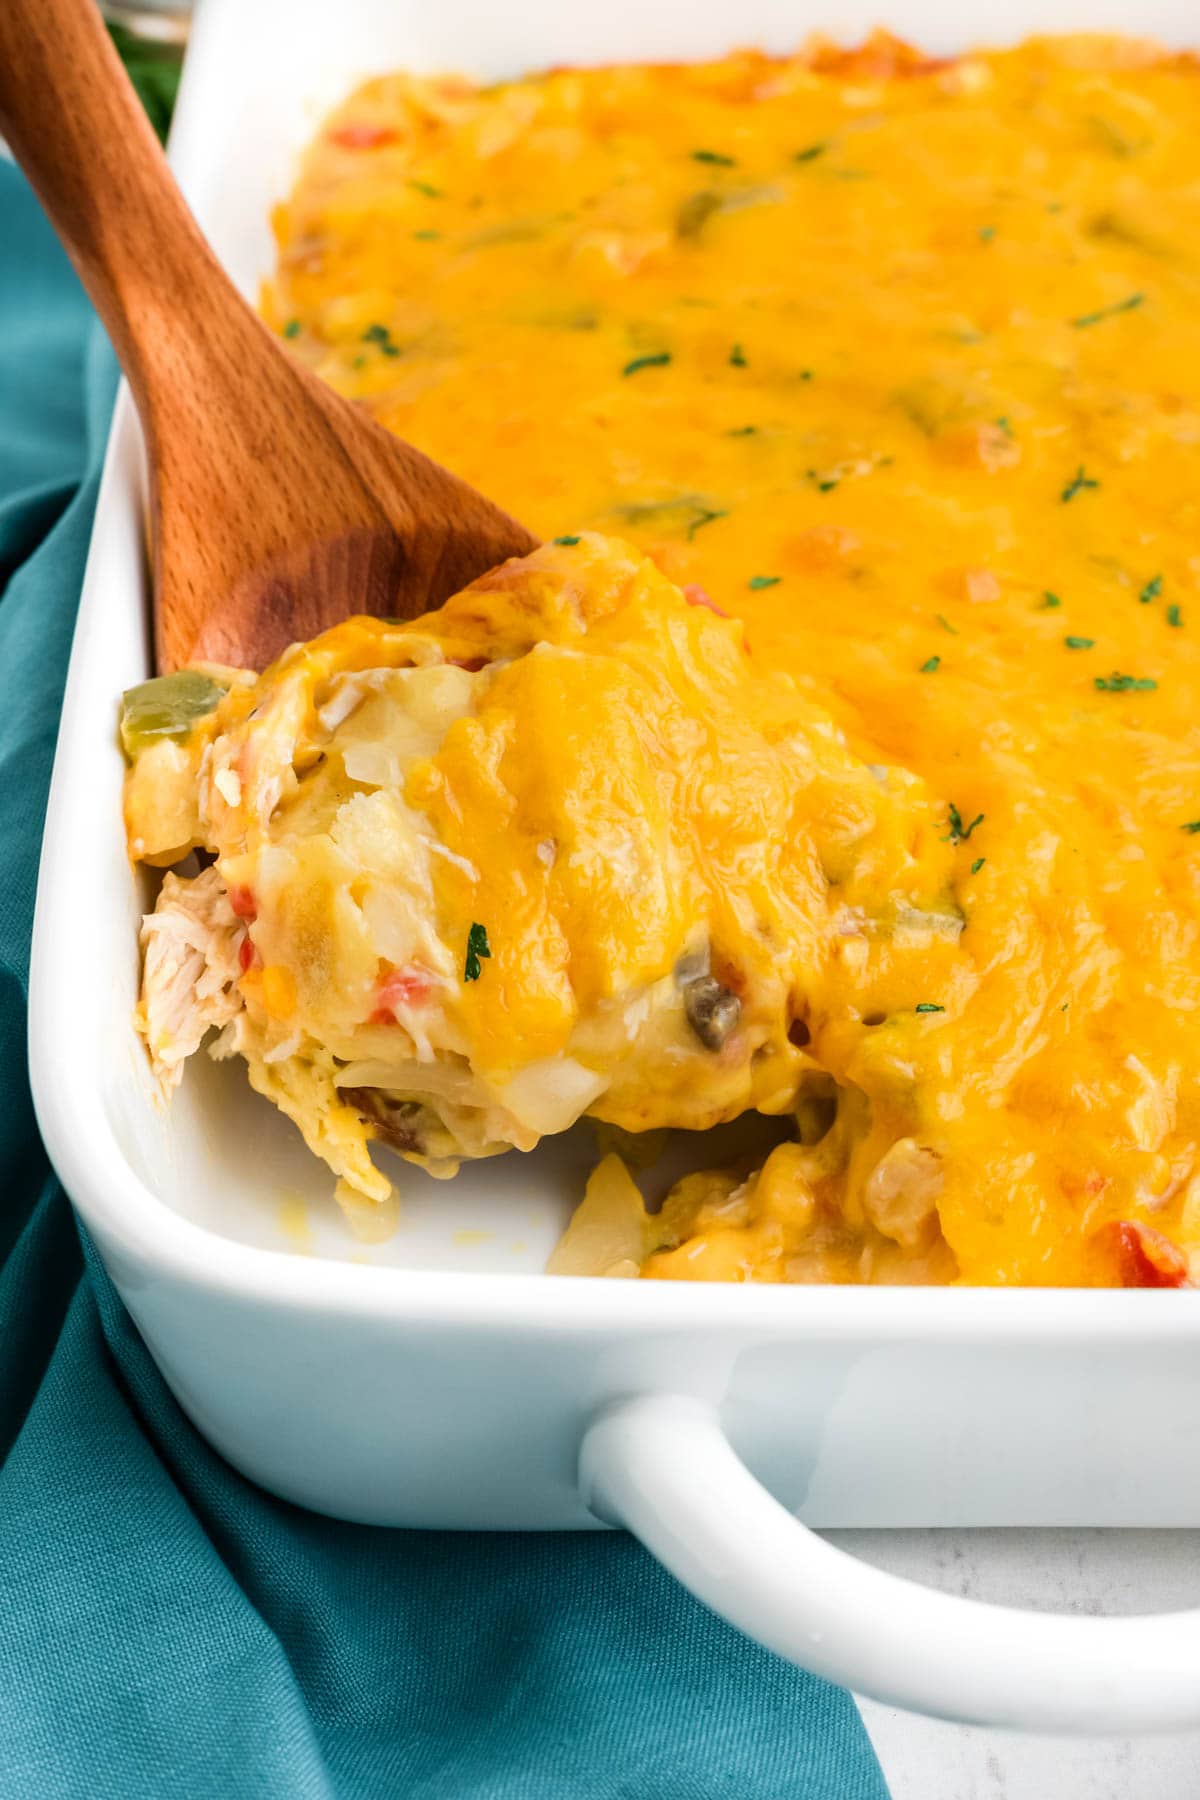 Chicken casserole with peppers in tomtaotes and cheese in a white casserole dish.